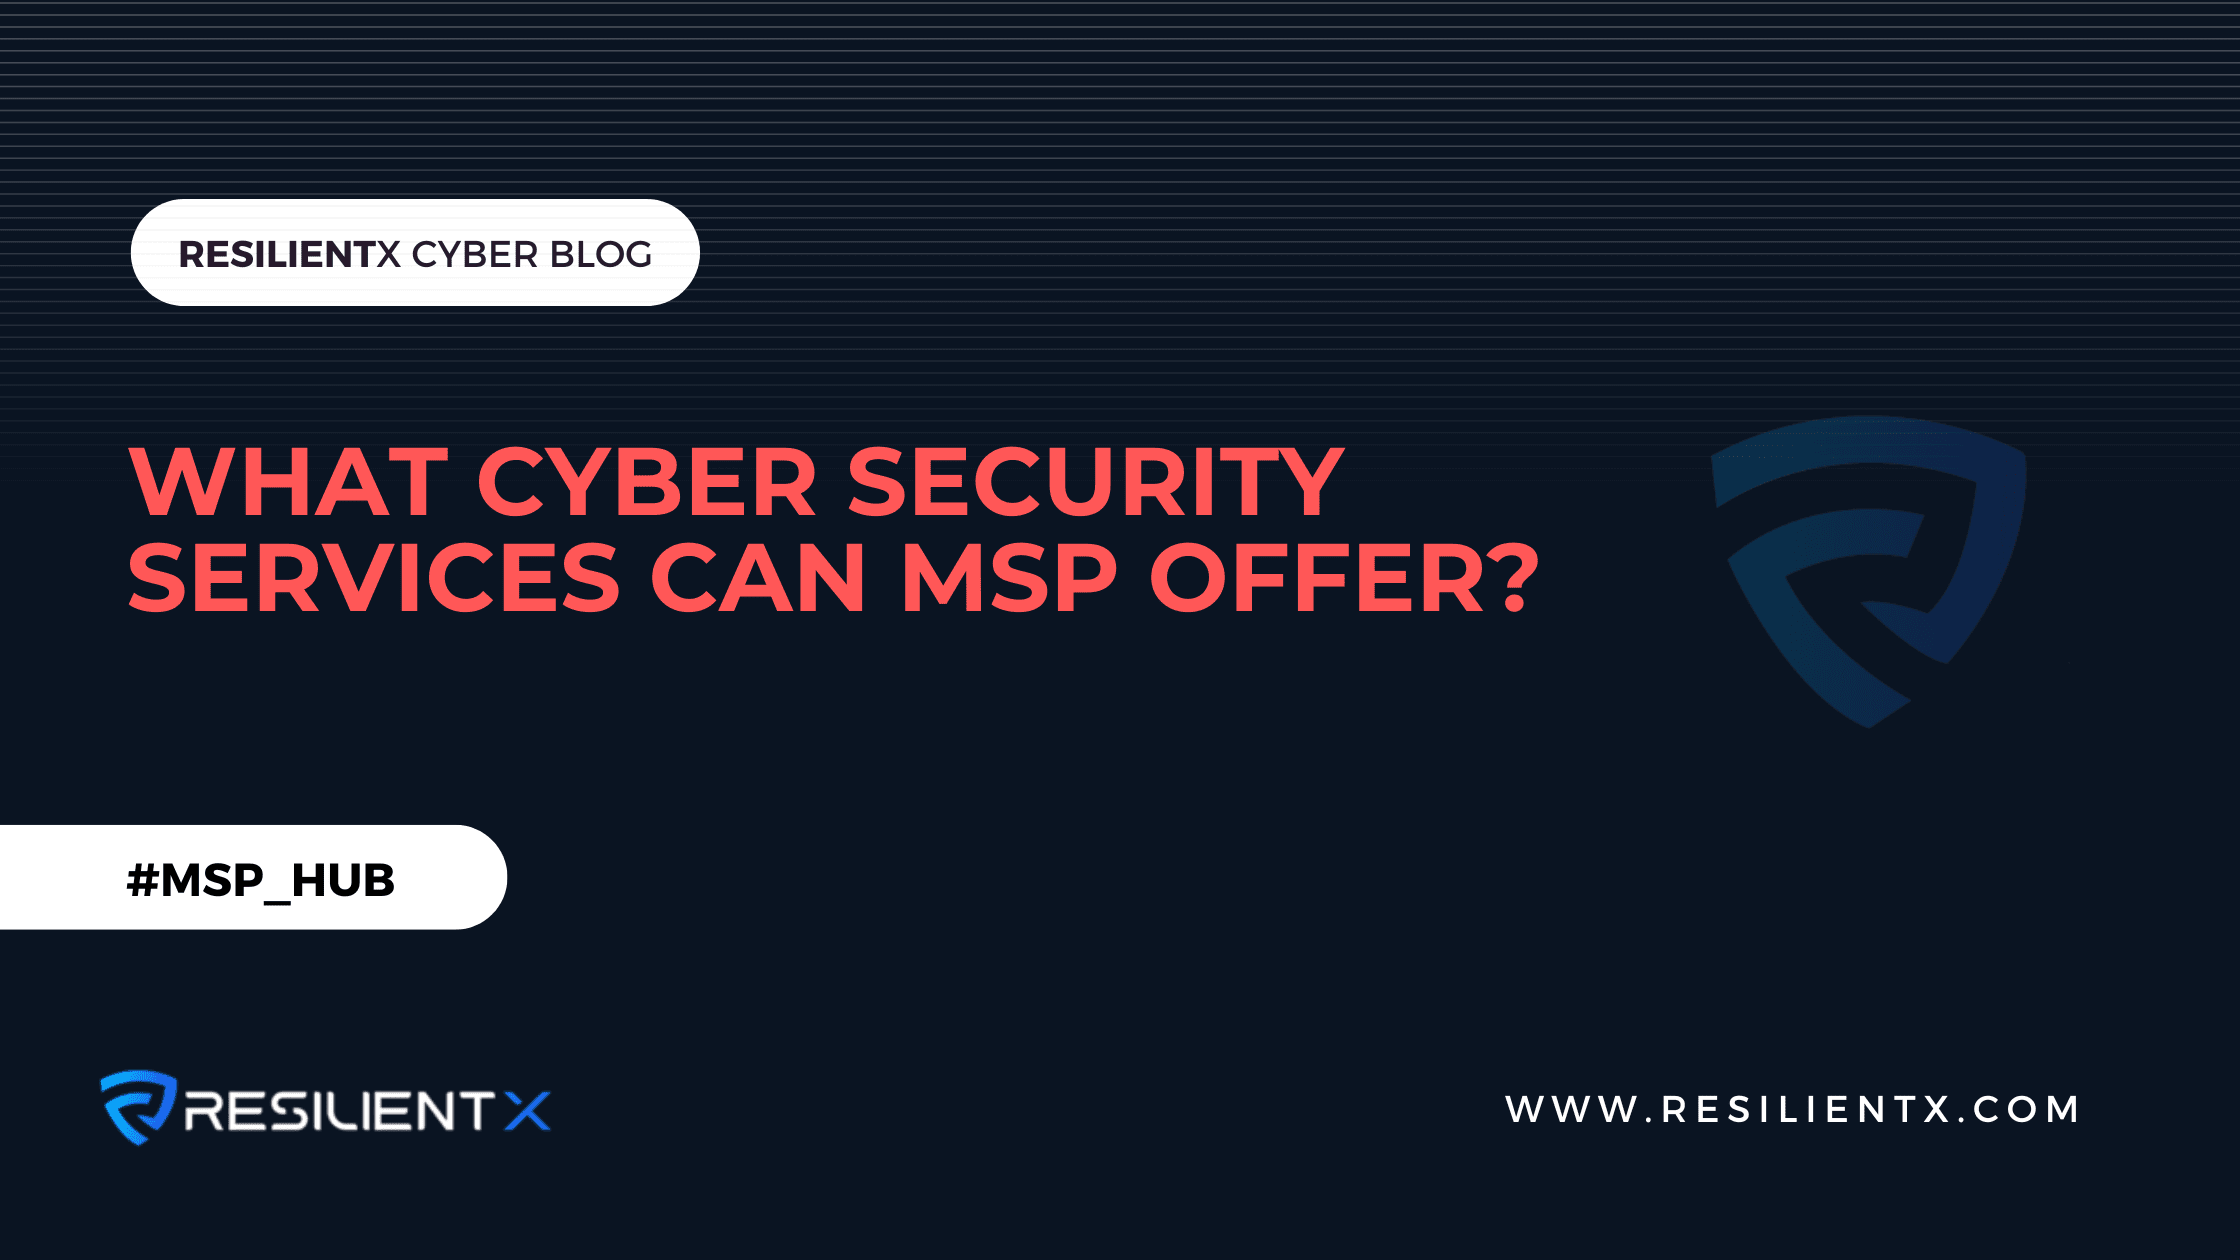 What Cyber Security Services Can MSP Offer